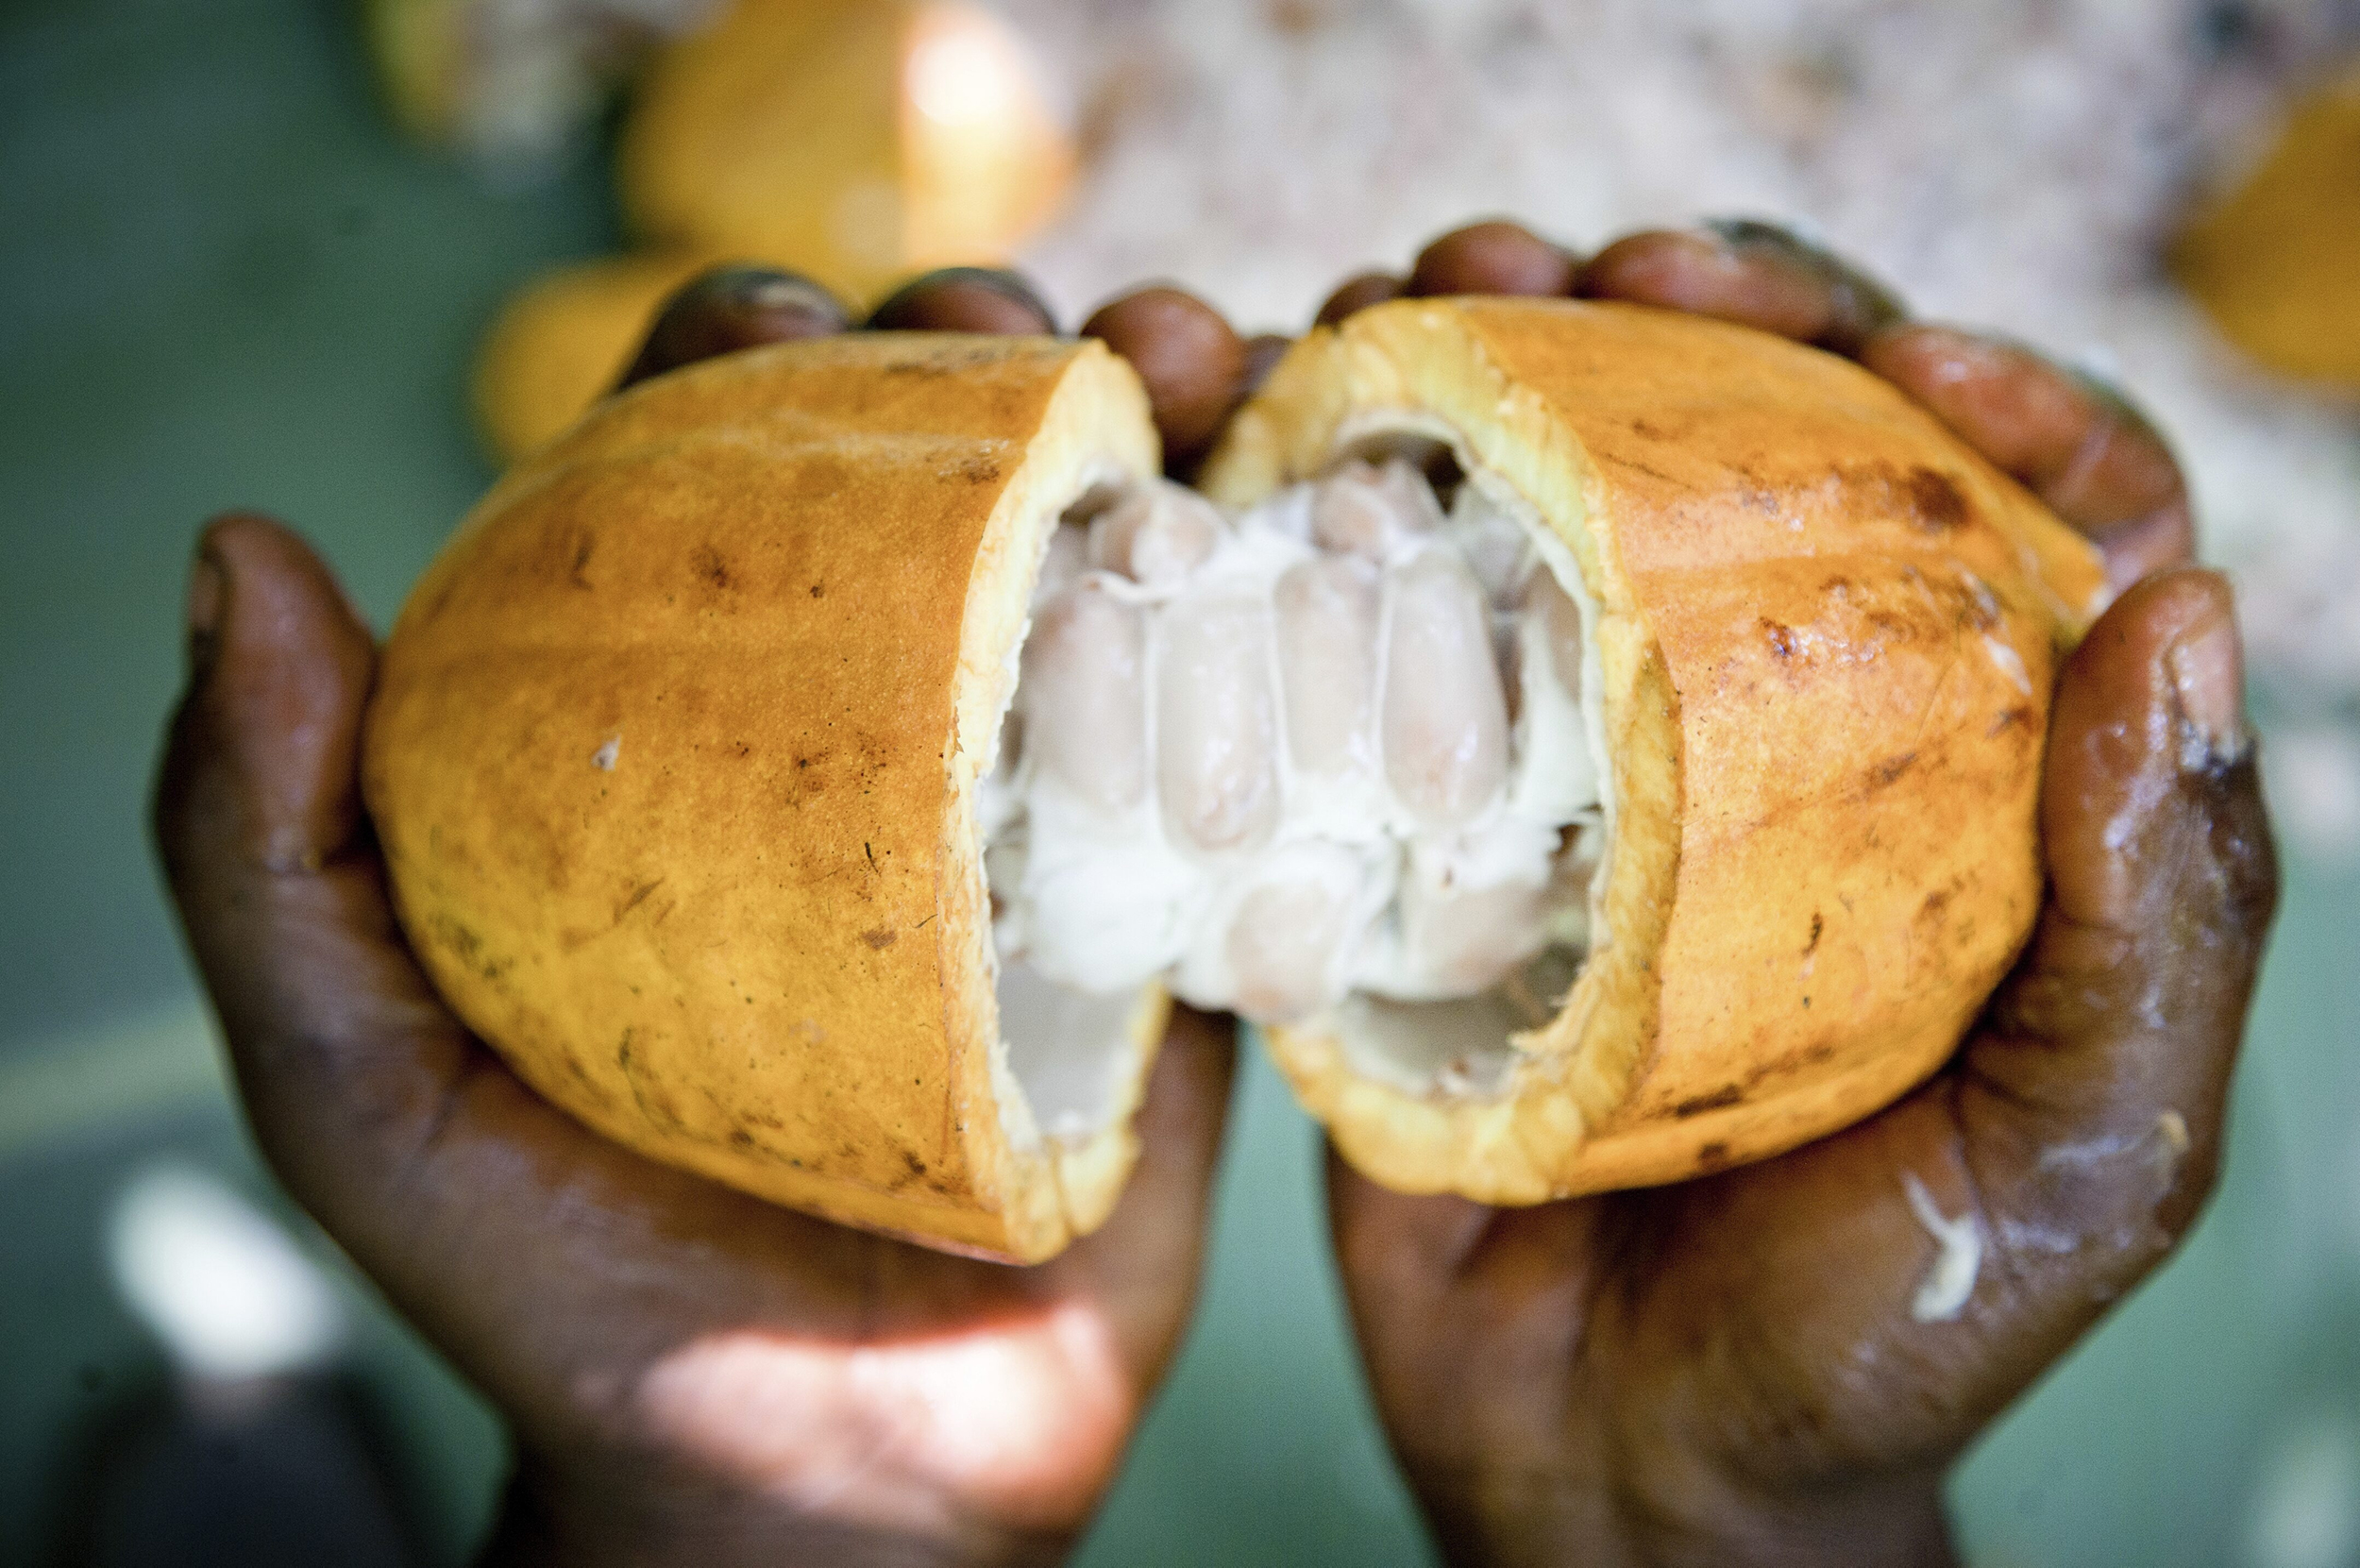 Hands holding cocoa fruit in close up